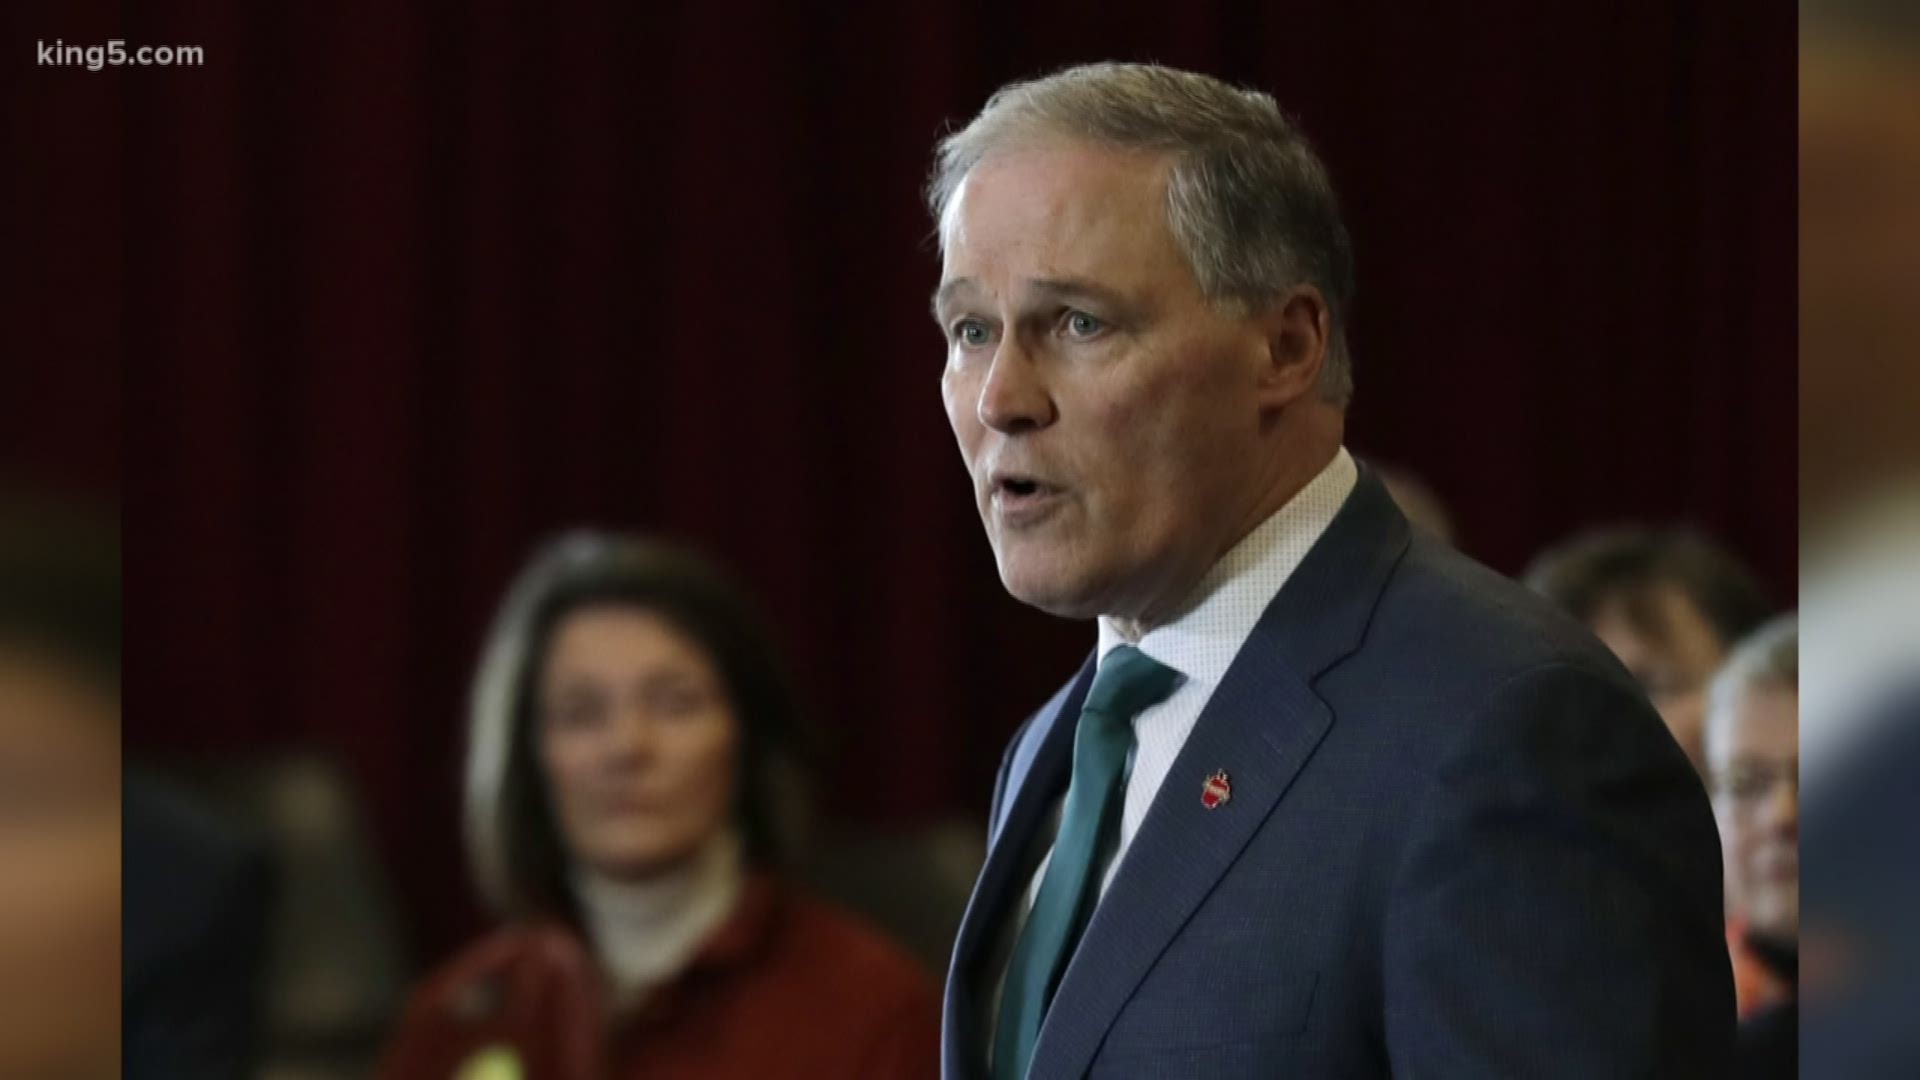 Washington Governor Jay Inslee is likely to announce his candidacy for president in the coming days, according to multiple sources who spoke with KING 5 on Wednesday.